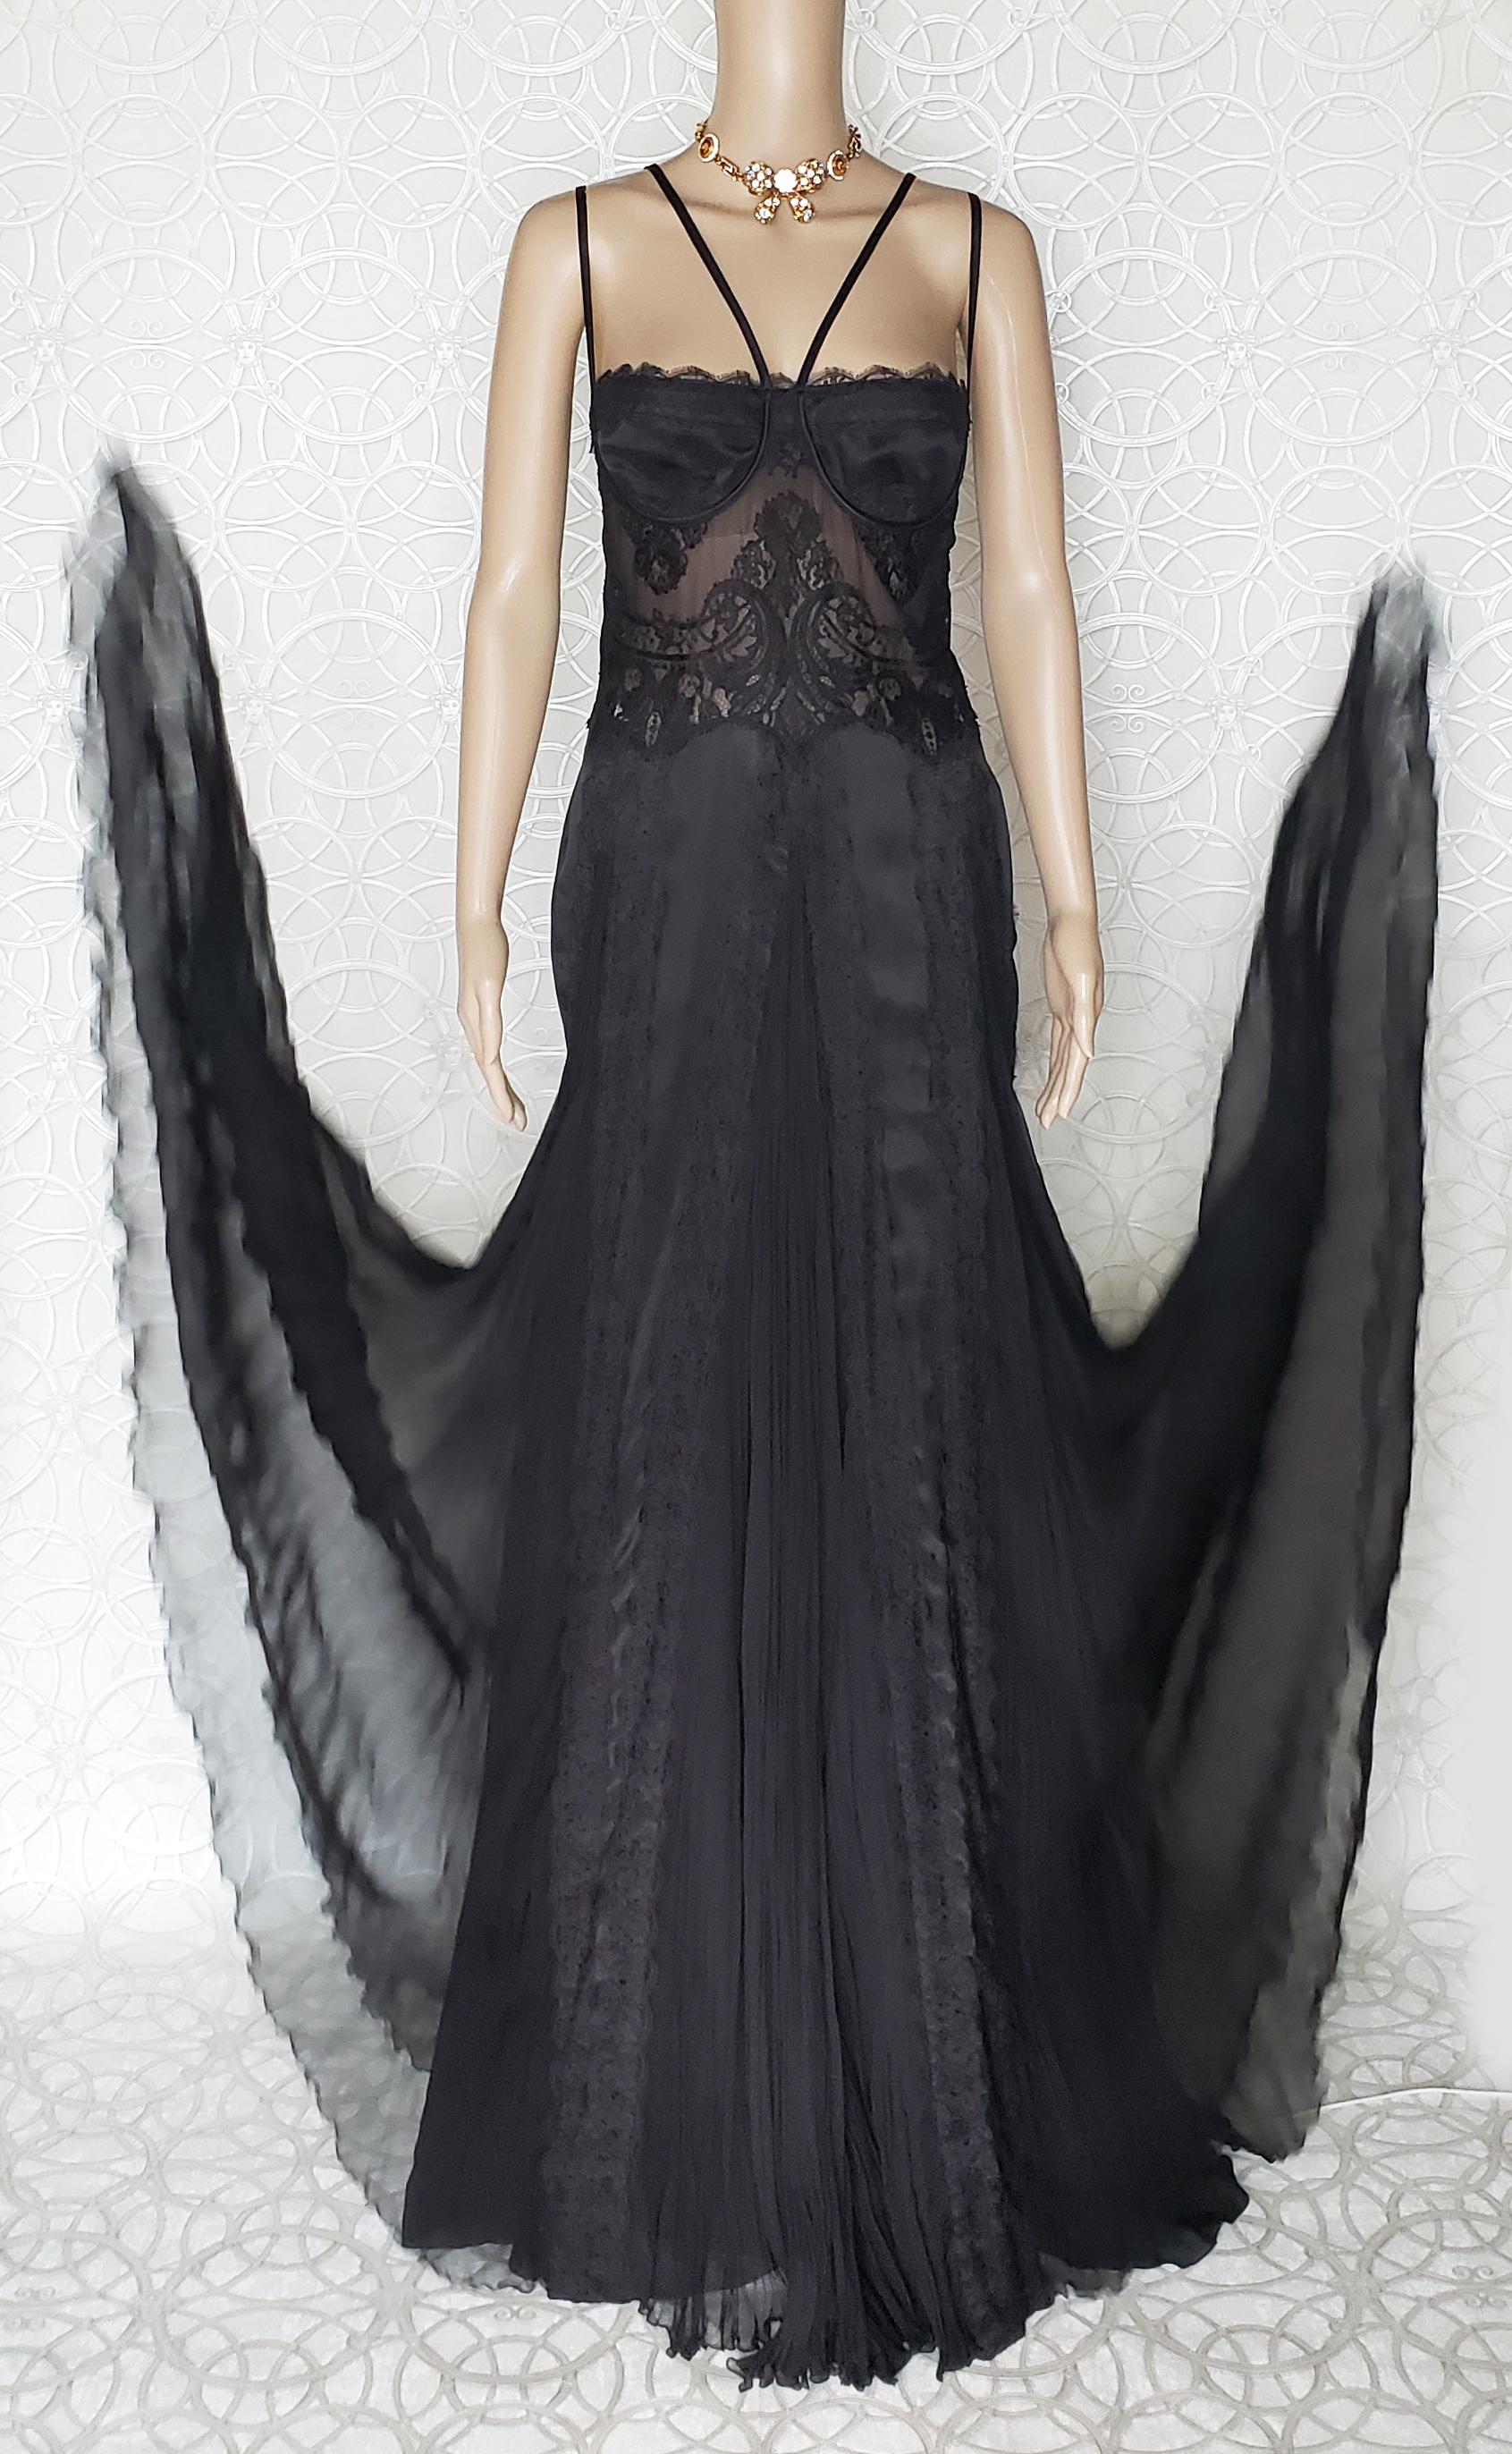 Fall 2003/2004 VINTAGE VERSACE BLACK SILK DRESS GOWN W/SHEER LACE Bodice  For Sale 4